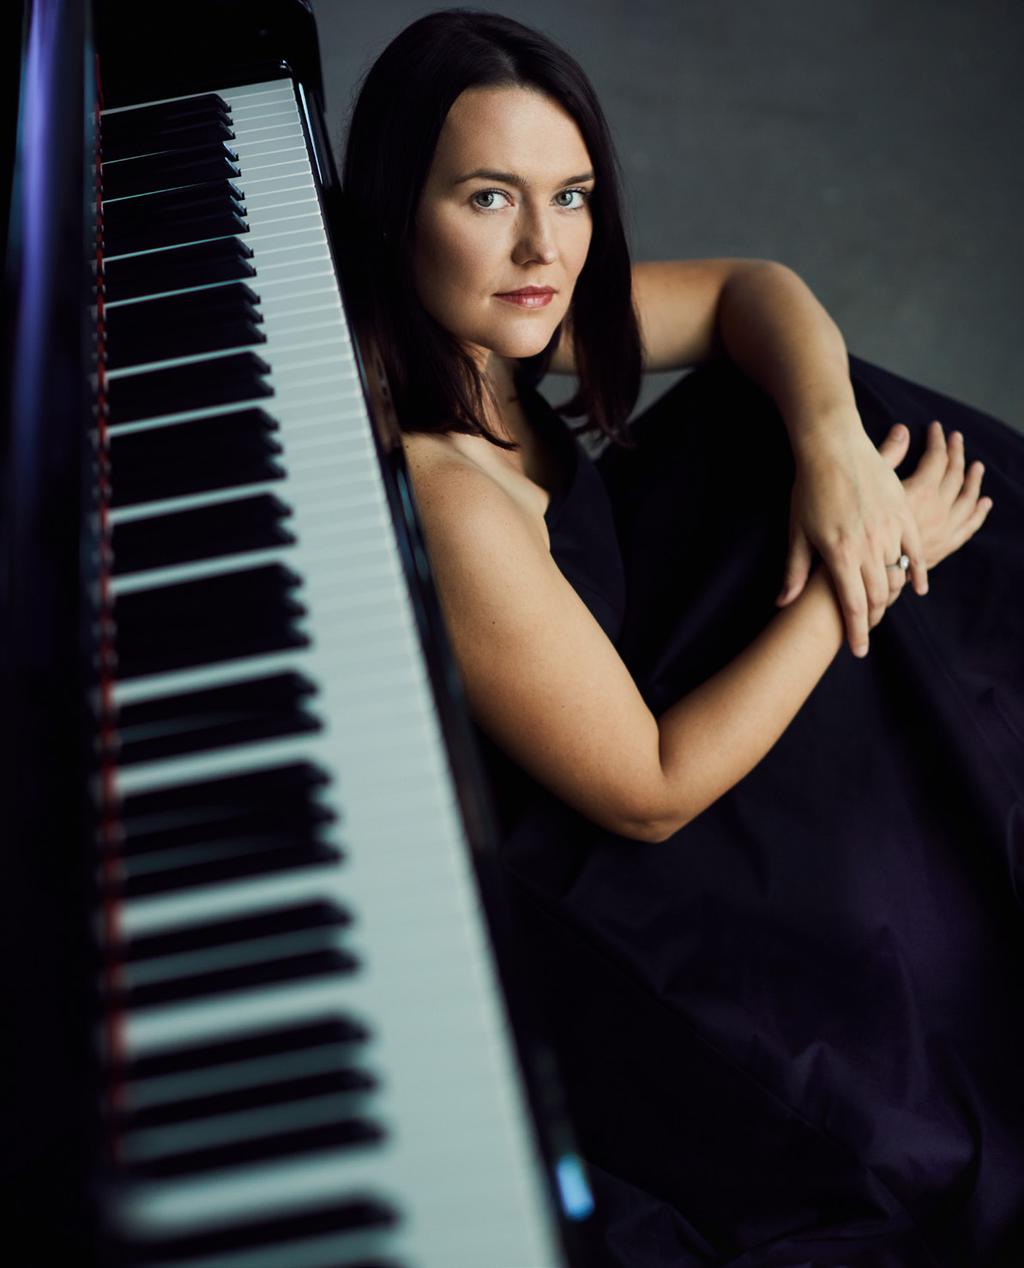 Alexandra Carlson opens the 2017-2018 Hyacinth Series with a solo piano recital, celebrating the gift of transcendent beauty through the